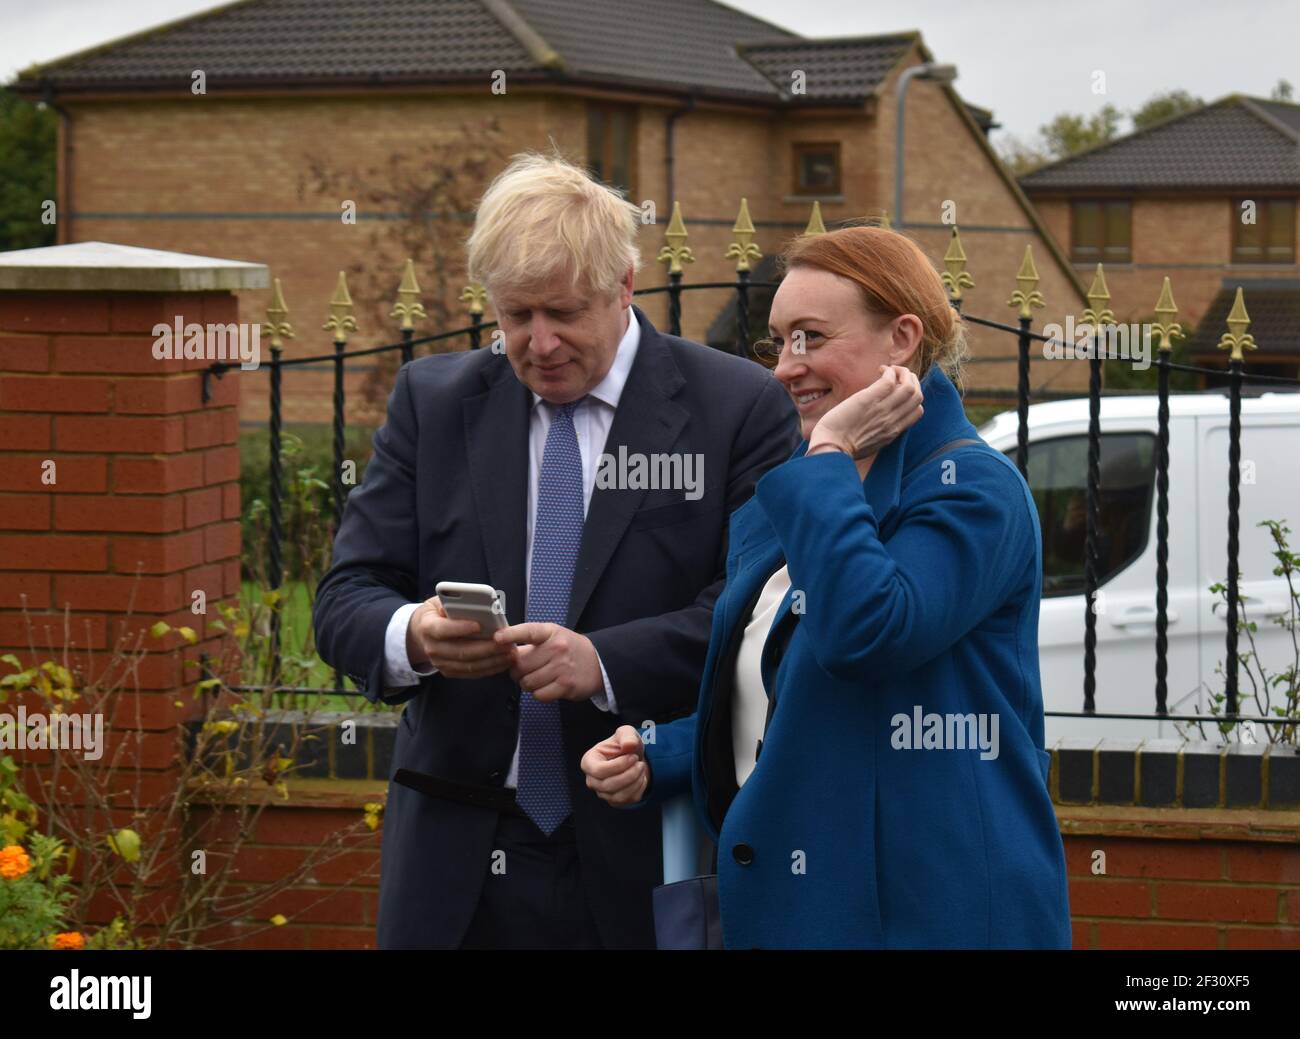 The UK Prime Minister Boris Johnson making a recording on a mobile phone during a visit to Milton Keynes in October 2019. Stock Photo